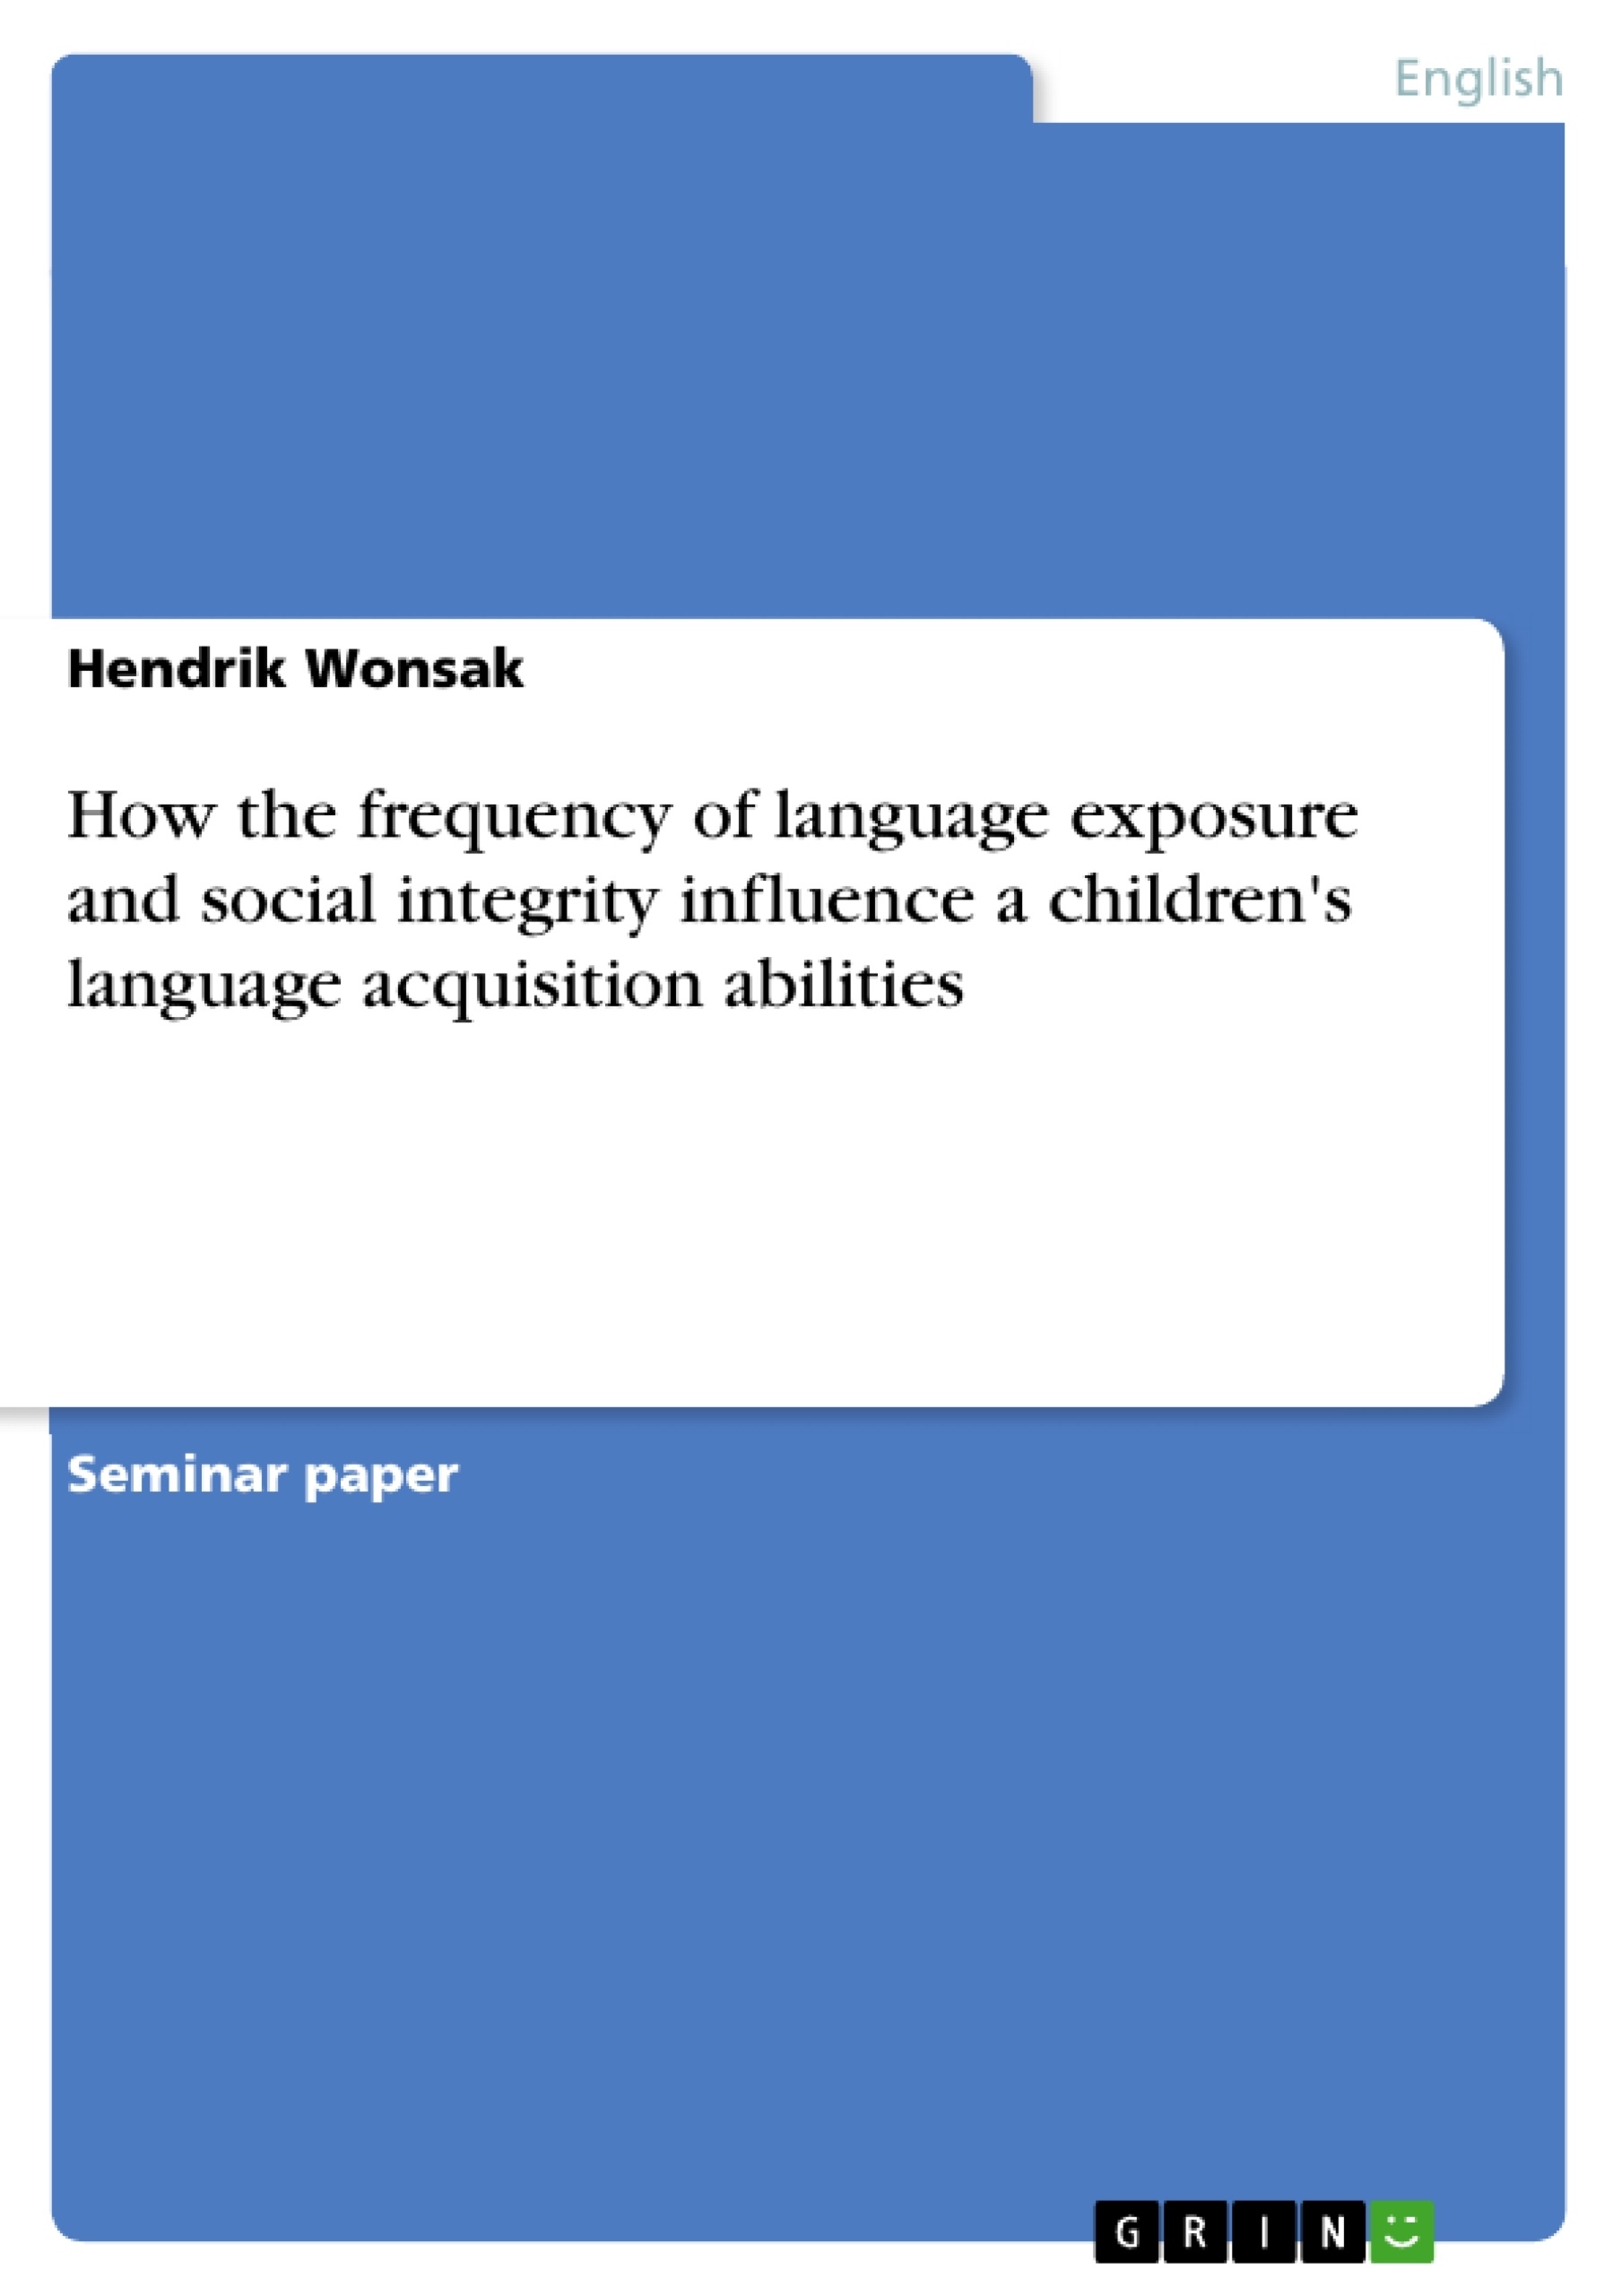 Title: How the frequency of language exposure and social integrity influence a children's language acquisition abilities